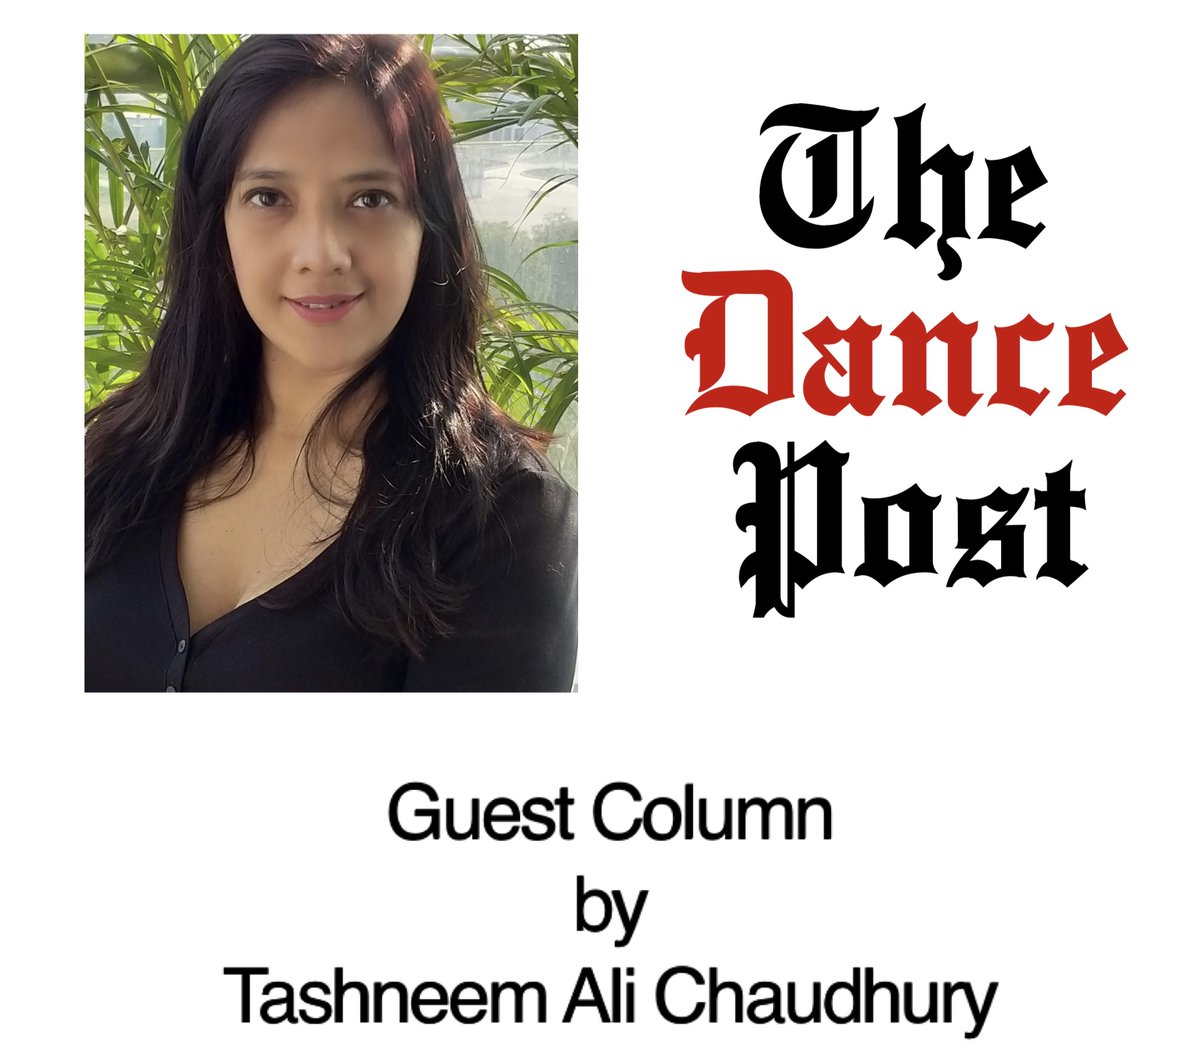 Journalist, author and media strategist @tash_writer  writes a guest column for us on what inspires her to dance. To read: facebook.com/10281372196217…
#thedancepost #dance #dancenews #dancemedia #guestcolumn #writer #journalist #thoughts #wordsfromtheheart